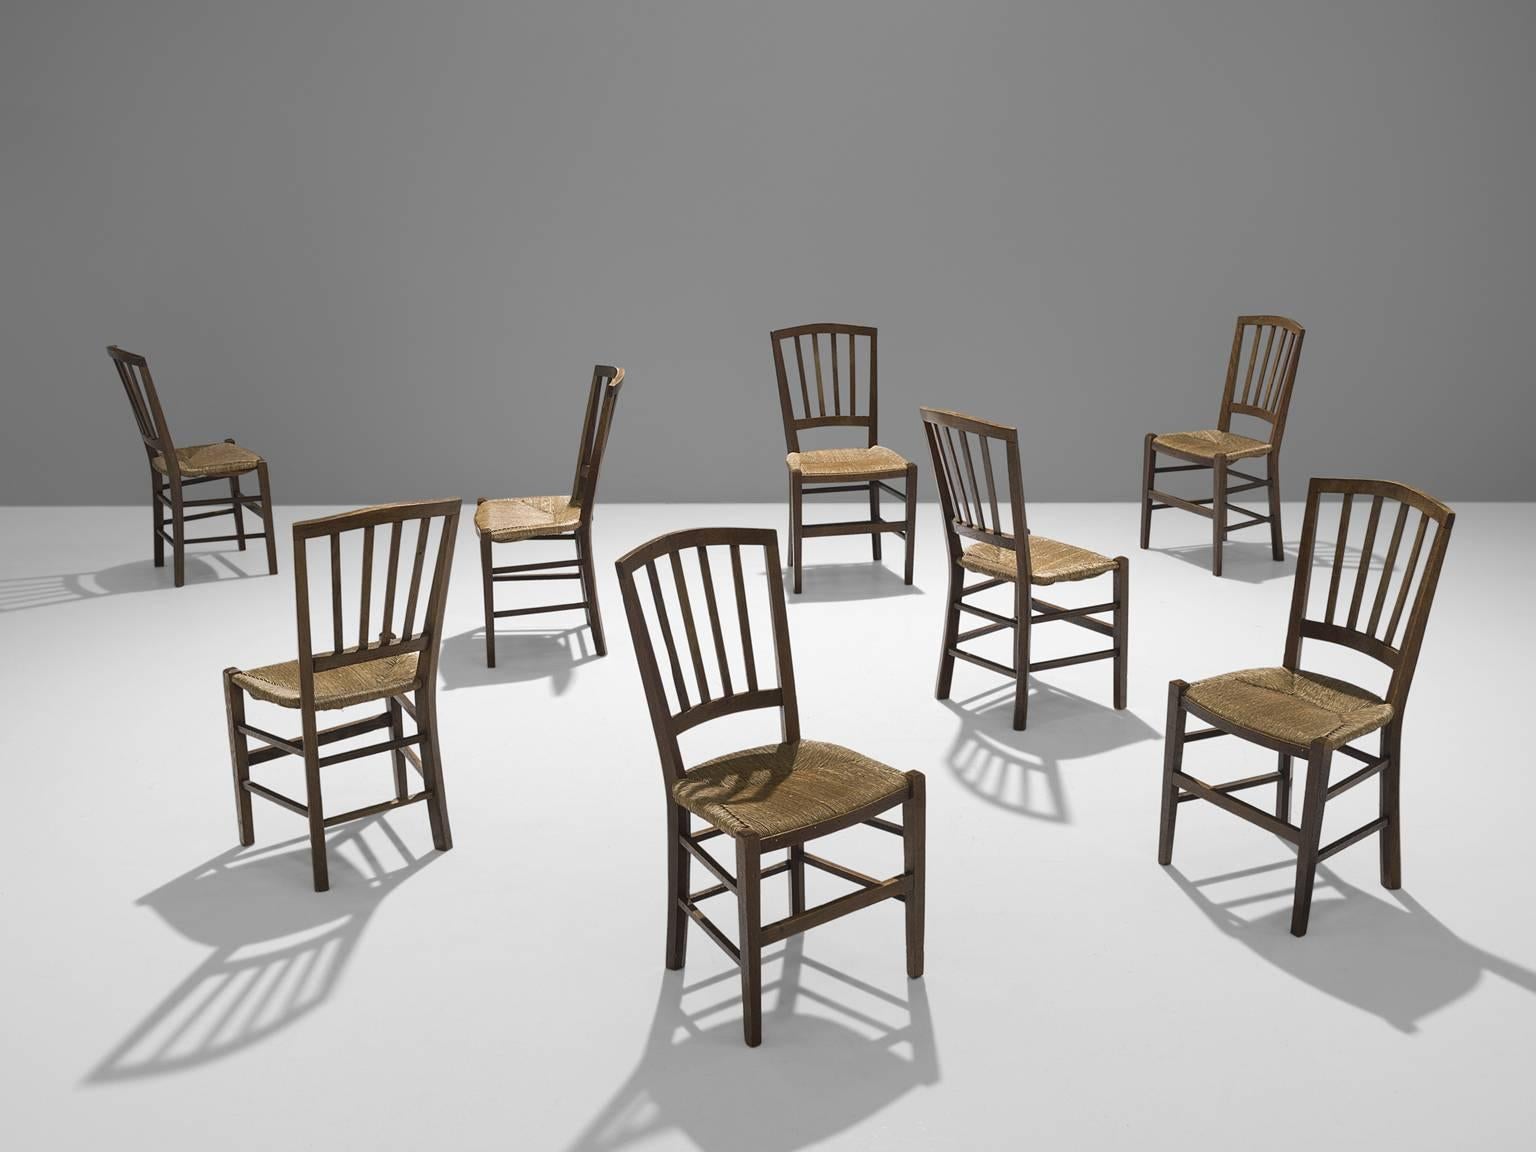 Large set of chairs, oak and rope, The Netherlands, 1960.

These eight stately chairs are executed in rope and patinated oak. The chairs have a solid and geometric backrest. The chairs are both functional and clear in their design. The design is